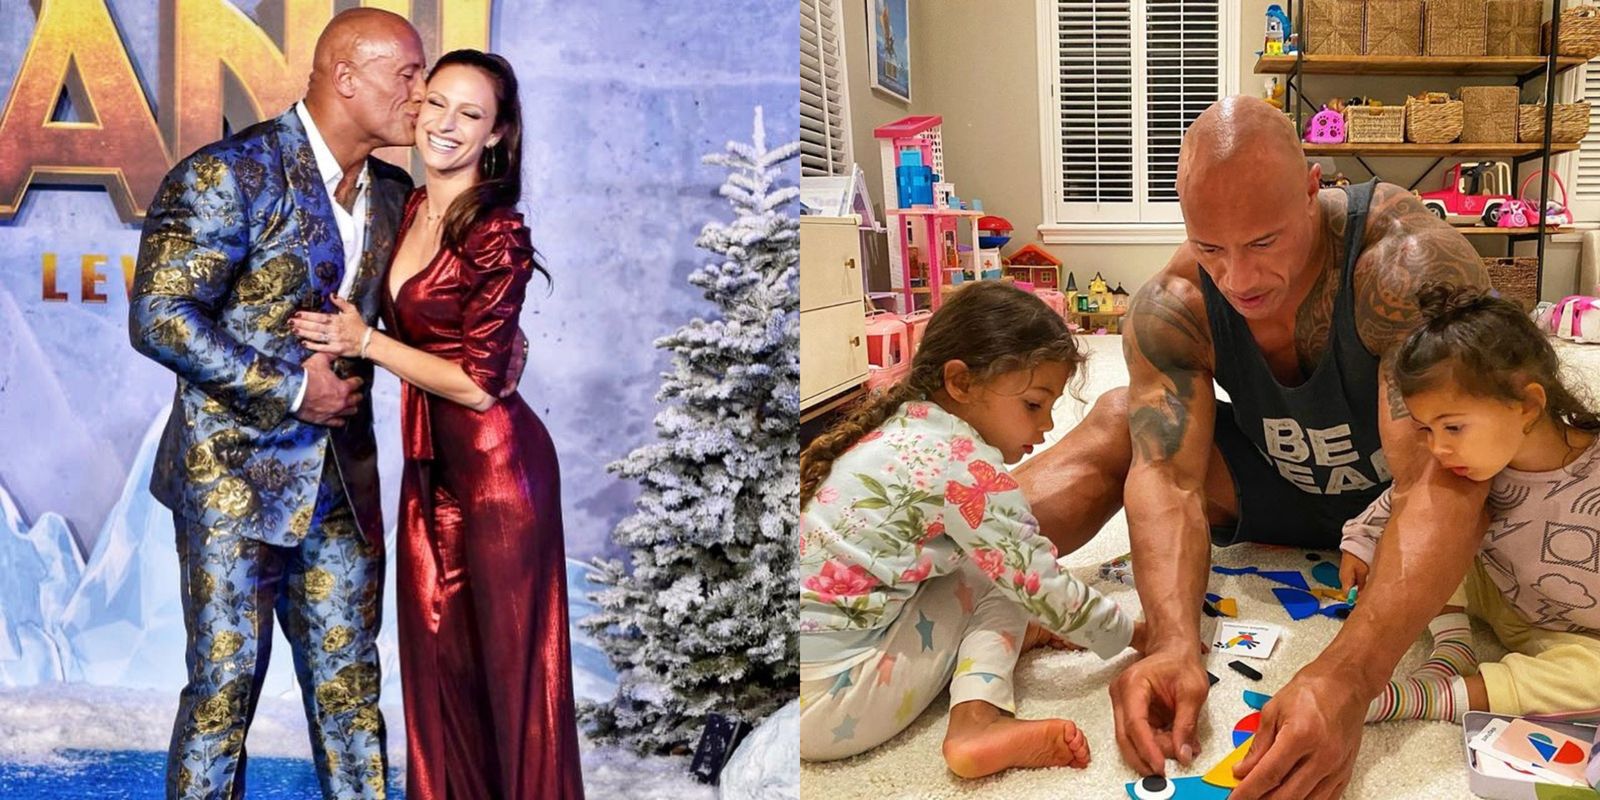 Dwayne Johnson 'The Rock' Reveals Him And His Family Tested Positive For Covid-19, Says He's Had 'Rough Go' Recovering